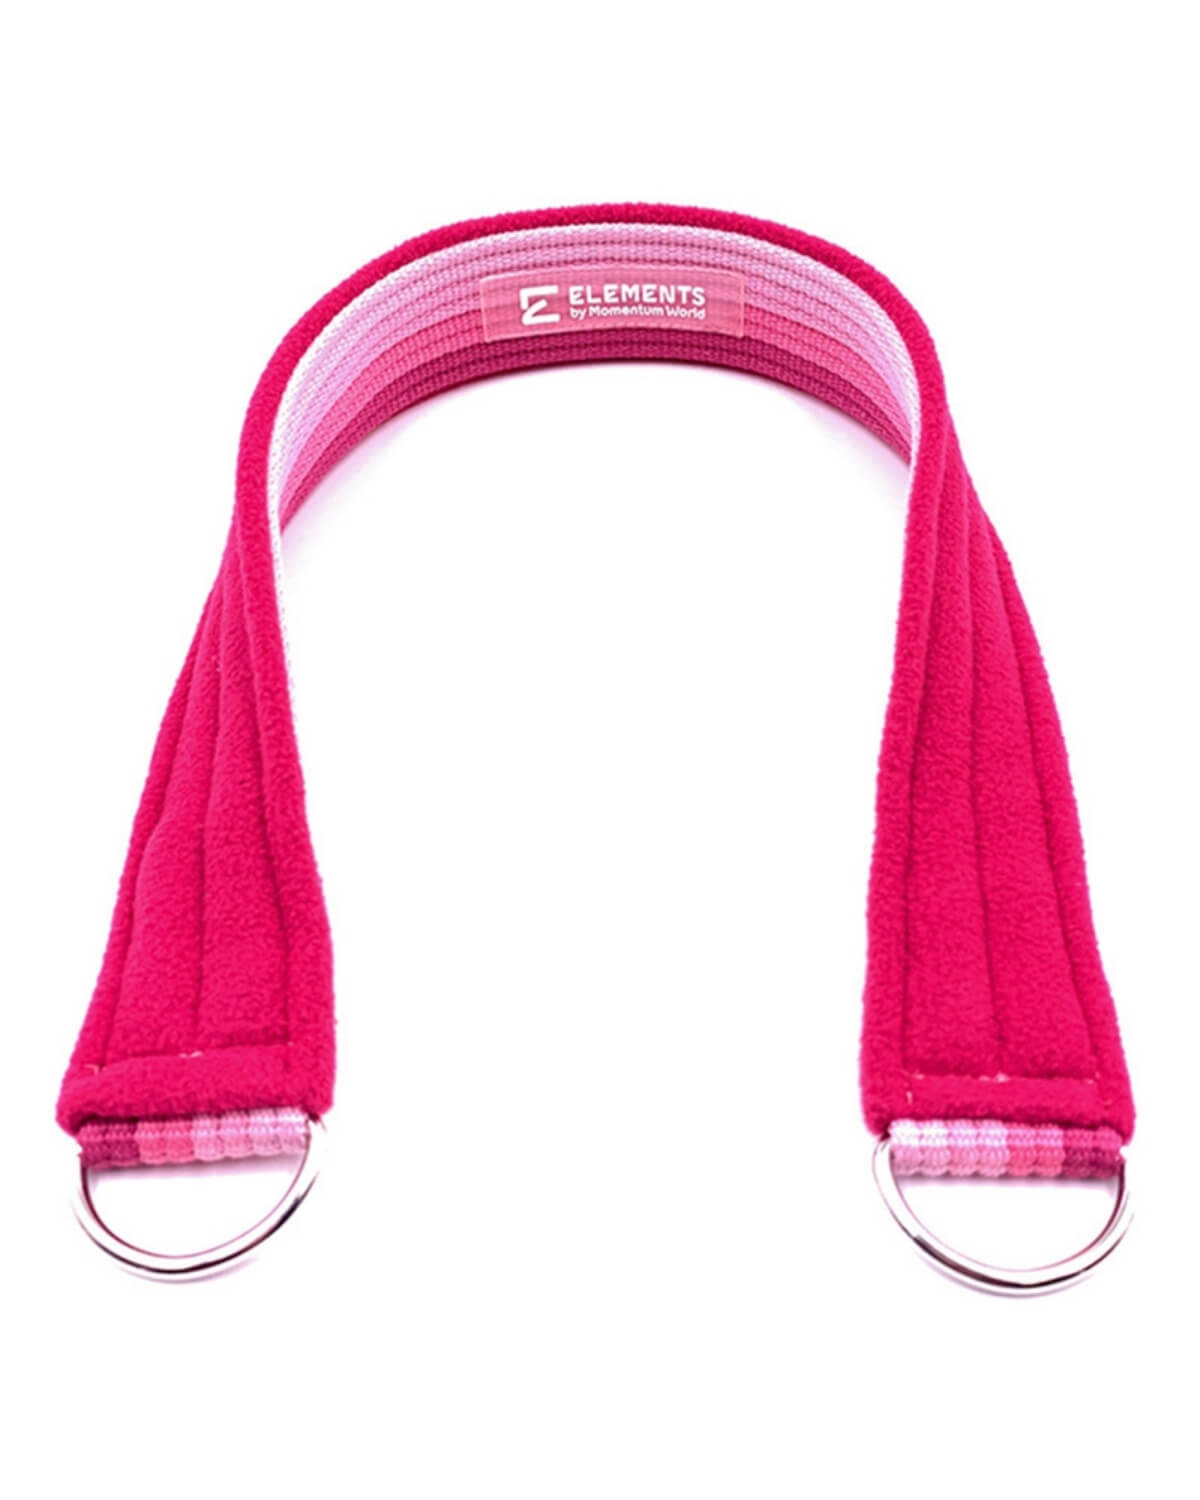  Strapilates Double Loop Fitness Pilates Straps for Reformer,  Cadillac, and Other Fitness Equipment, One Pair, Pink : Sports & Outdoors